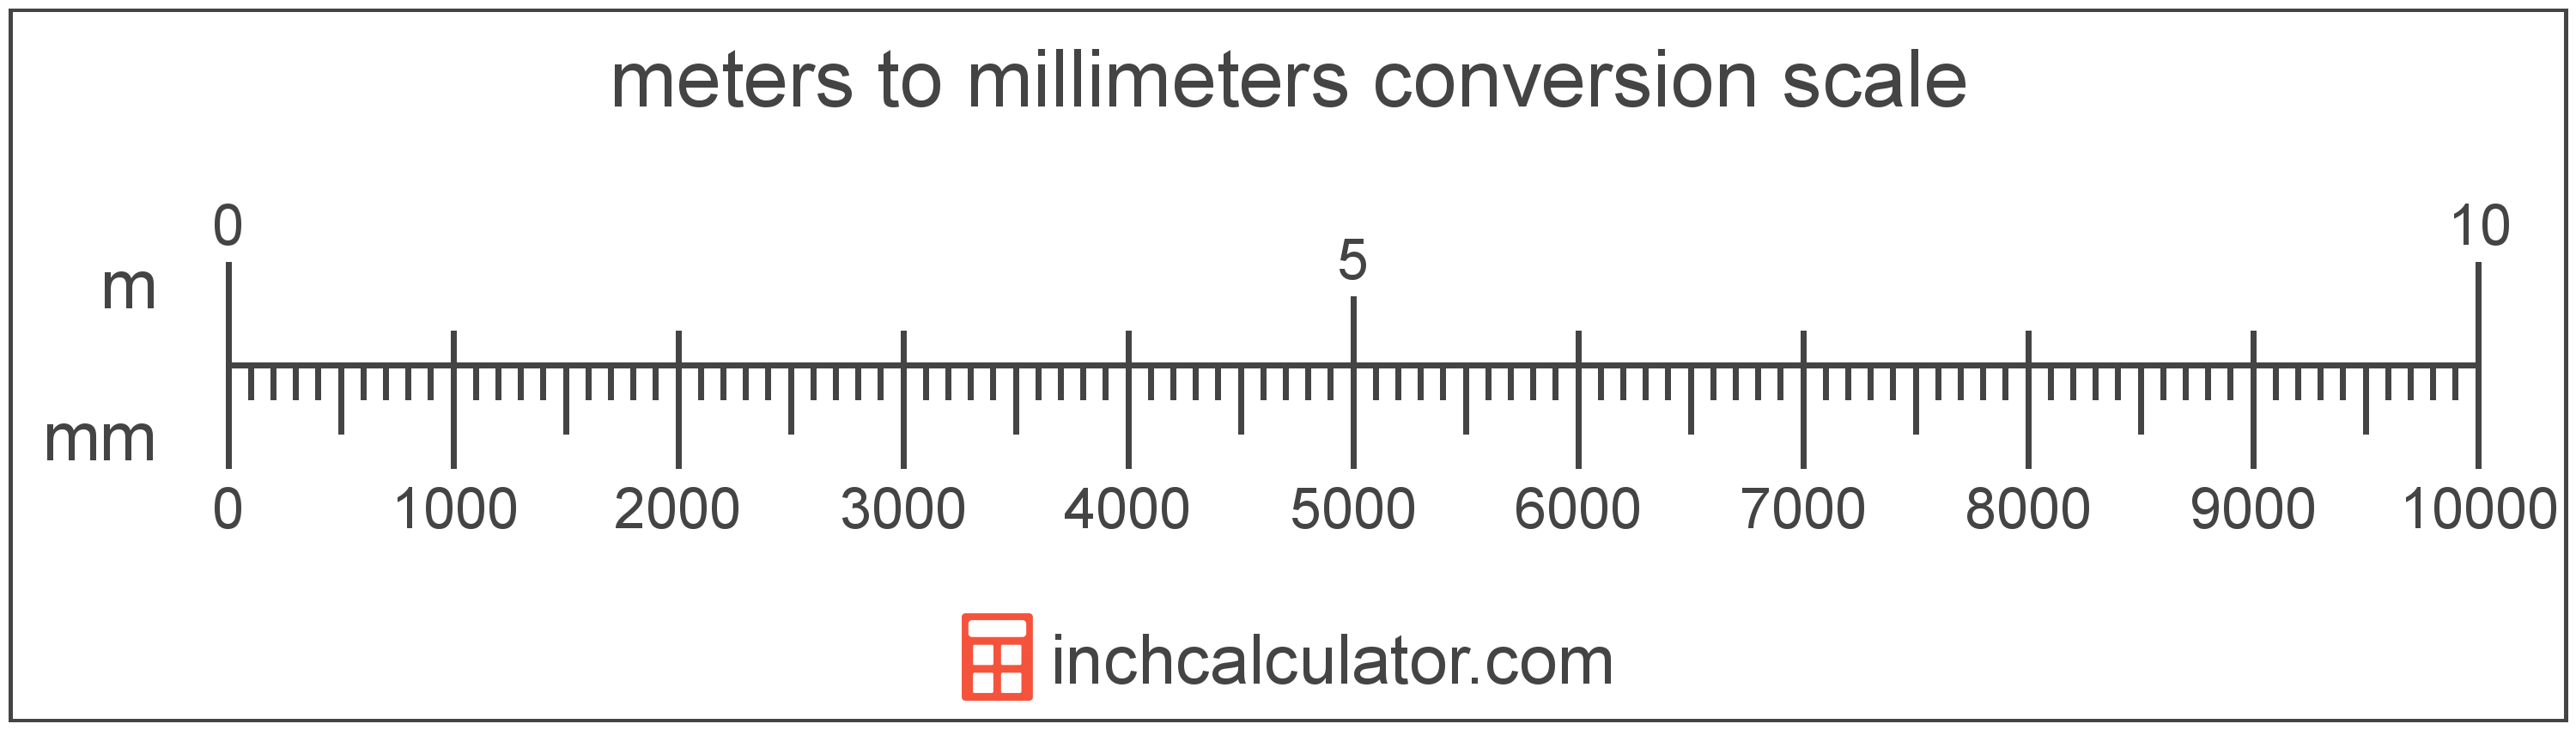 conversion scale showing meters and equivalent millimeters length values